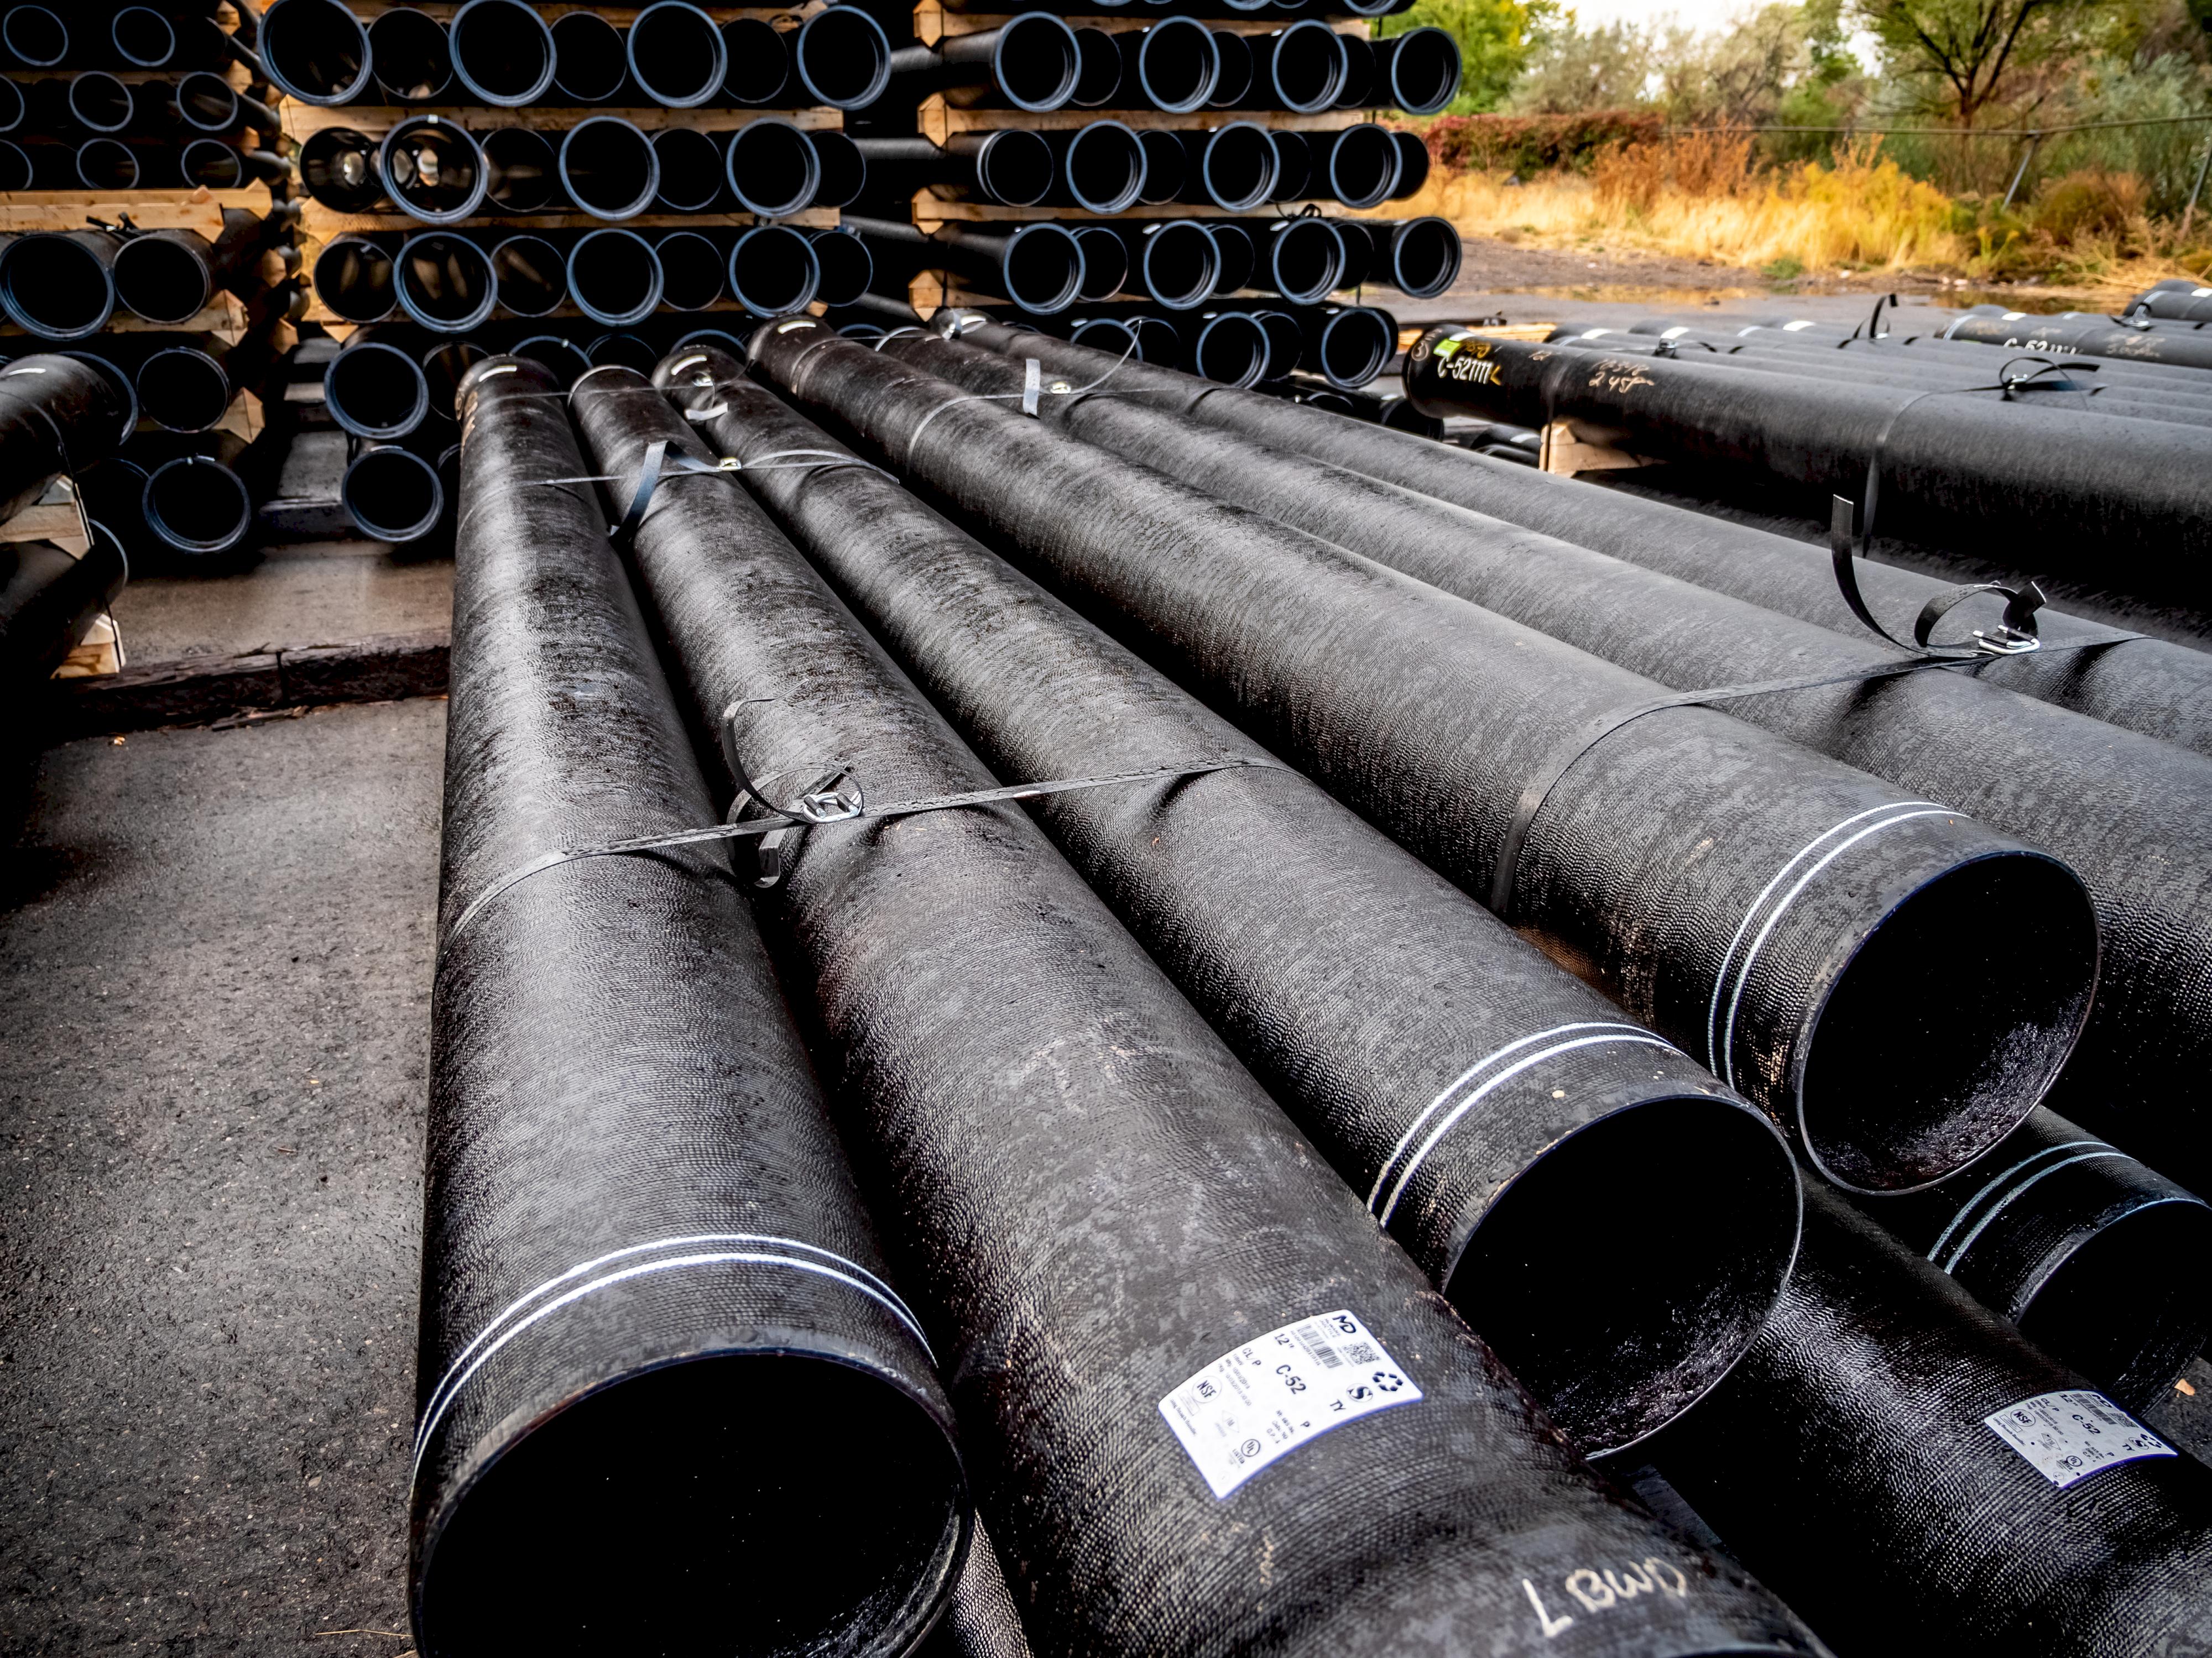 Ductile Iron Vs. Steel Pipe: How To Make The Best Choice - McWane